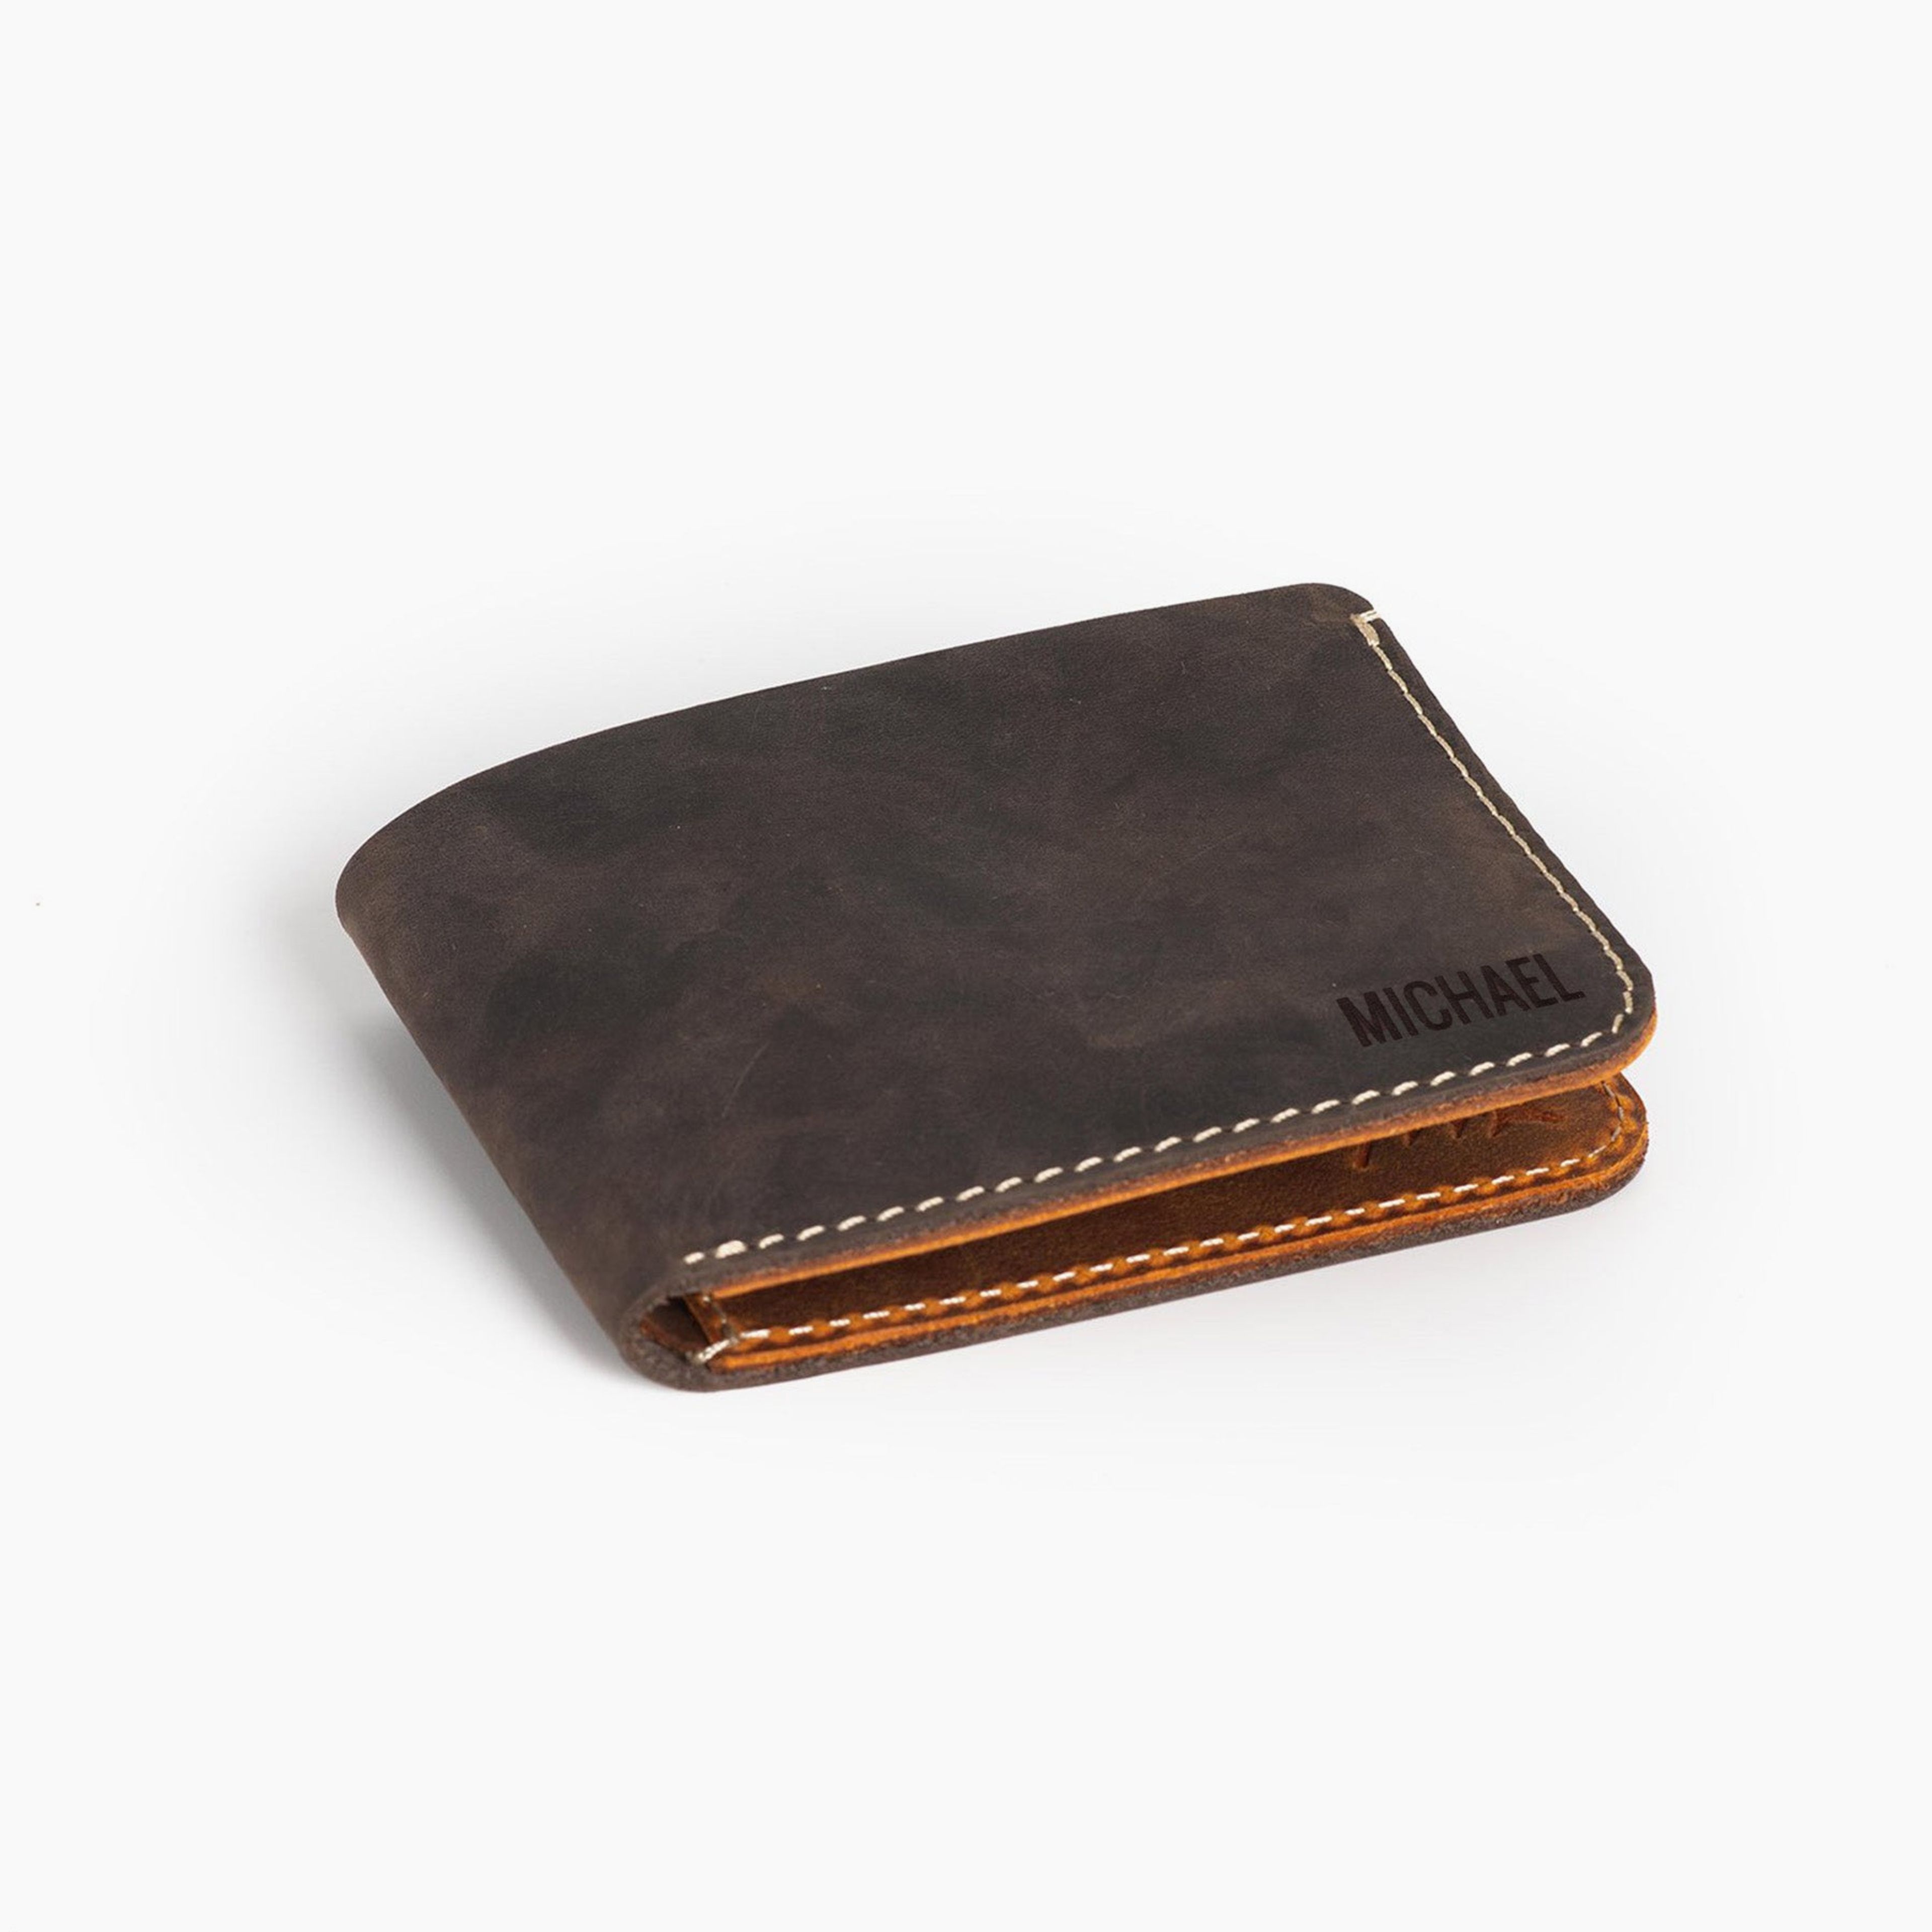 McNeil 3-Toned Leather Slim Wallet | Warehouse Sale